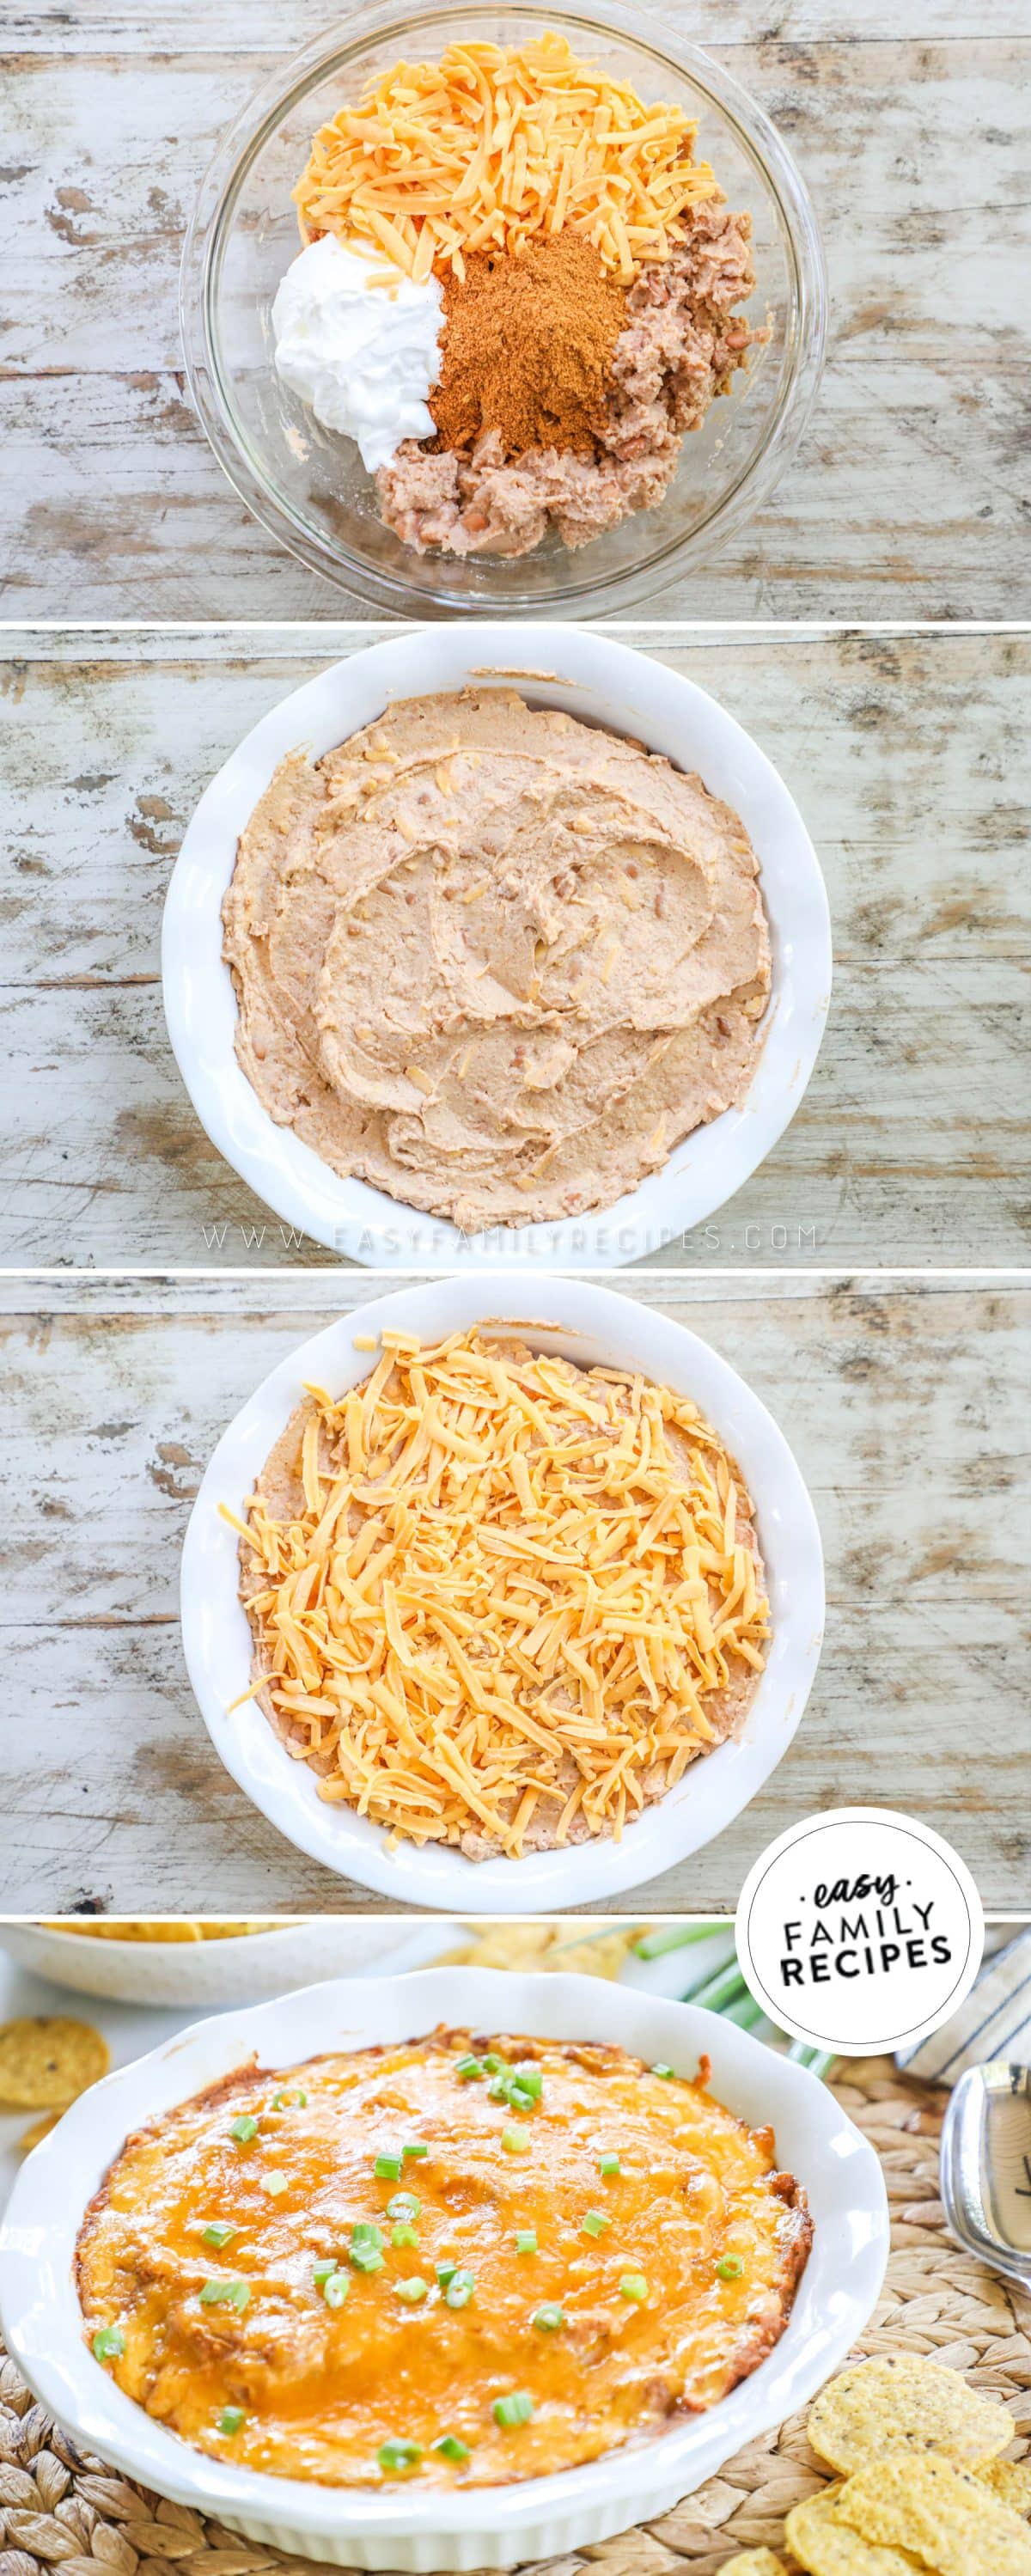 Steps to make bean dip step 1 mix everything except half of the cheese in a bowl step 2 put in casserole dish step 3 top with remaining cheese step 4 bake and enjoy!